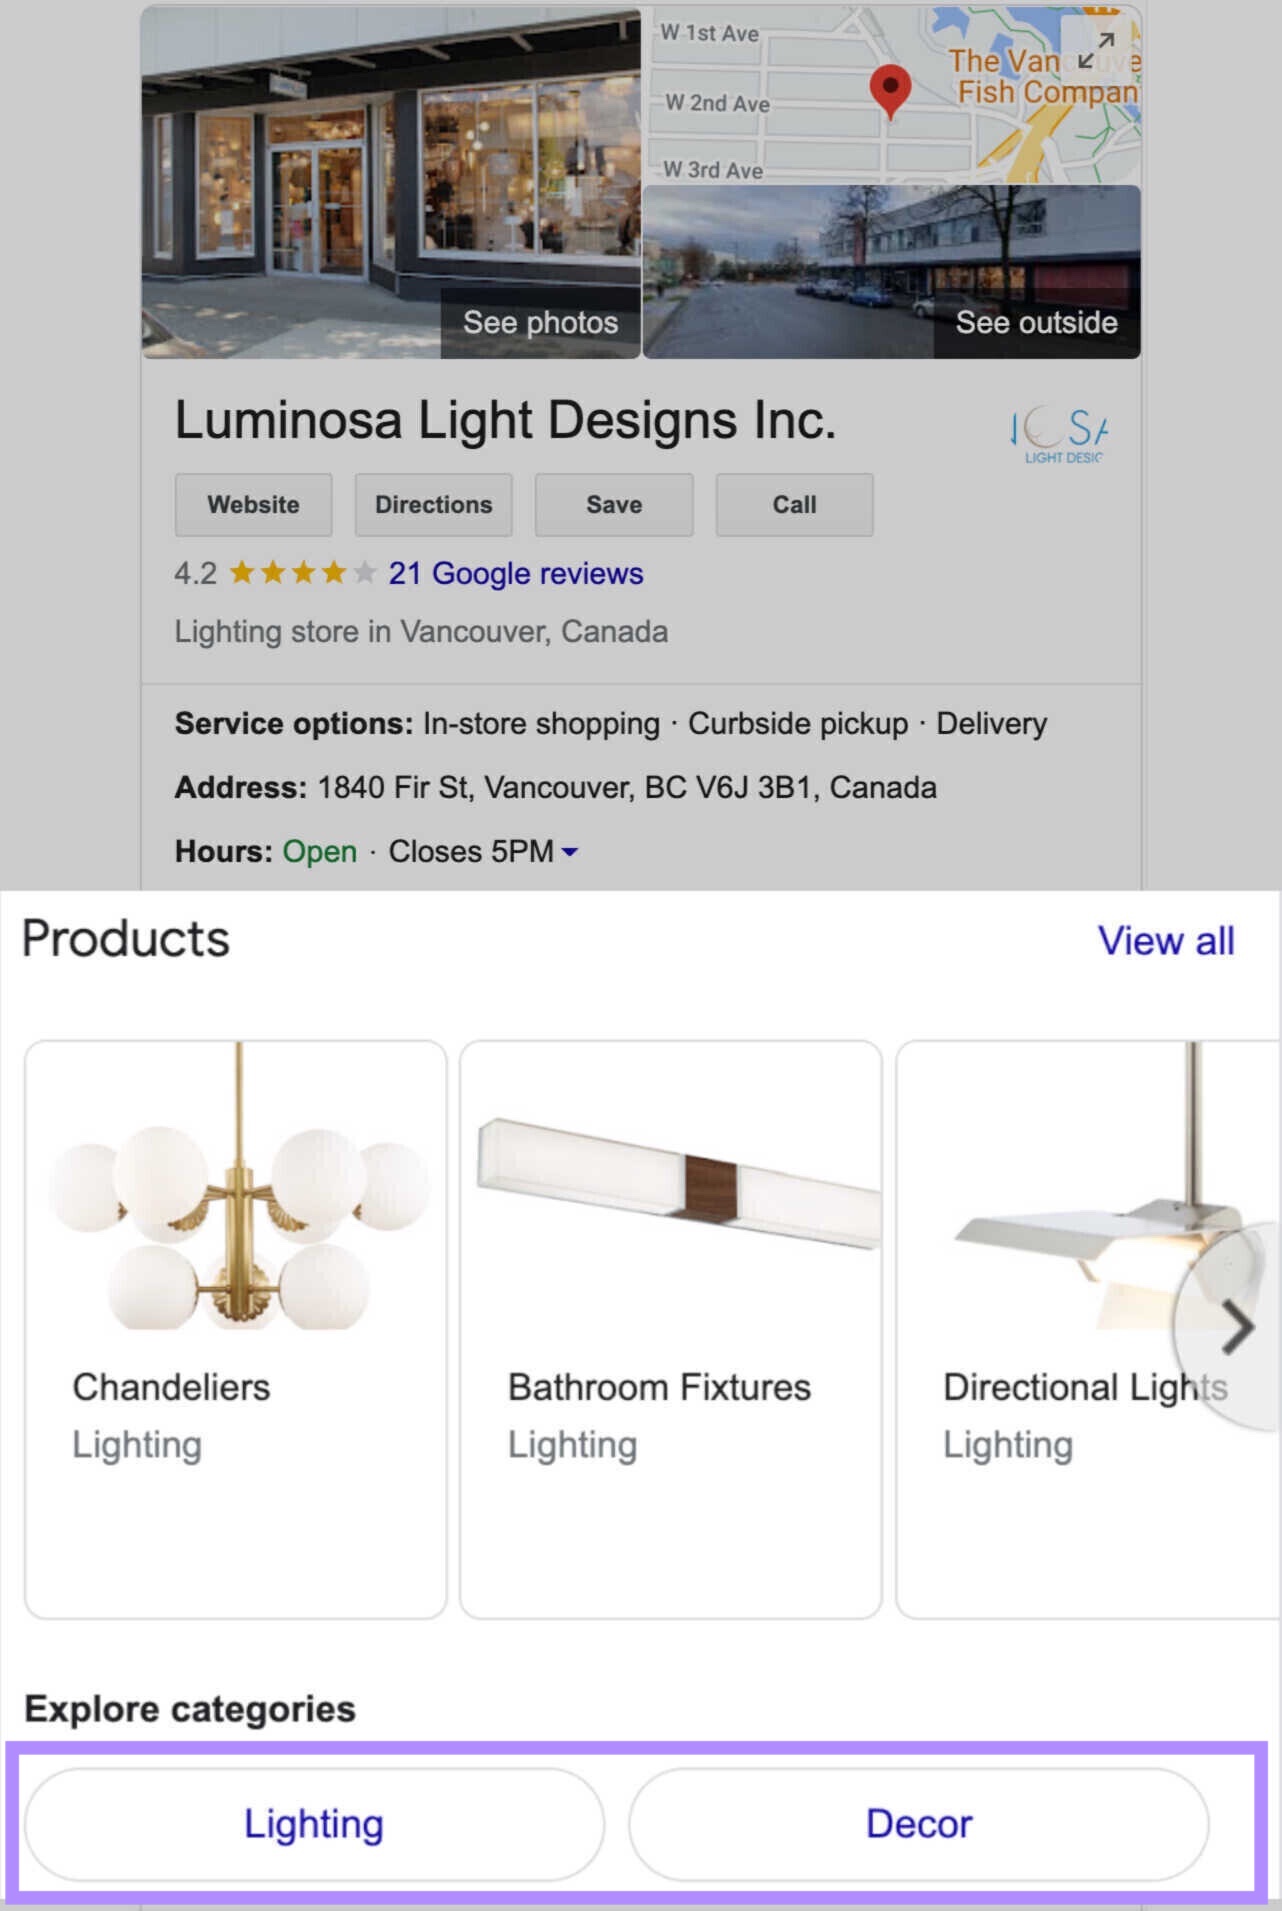 "Products" section under Luminosa Light Designs Inc. GBP